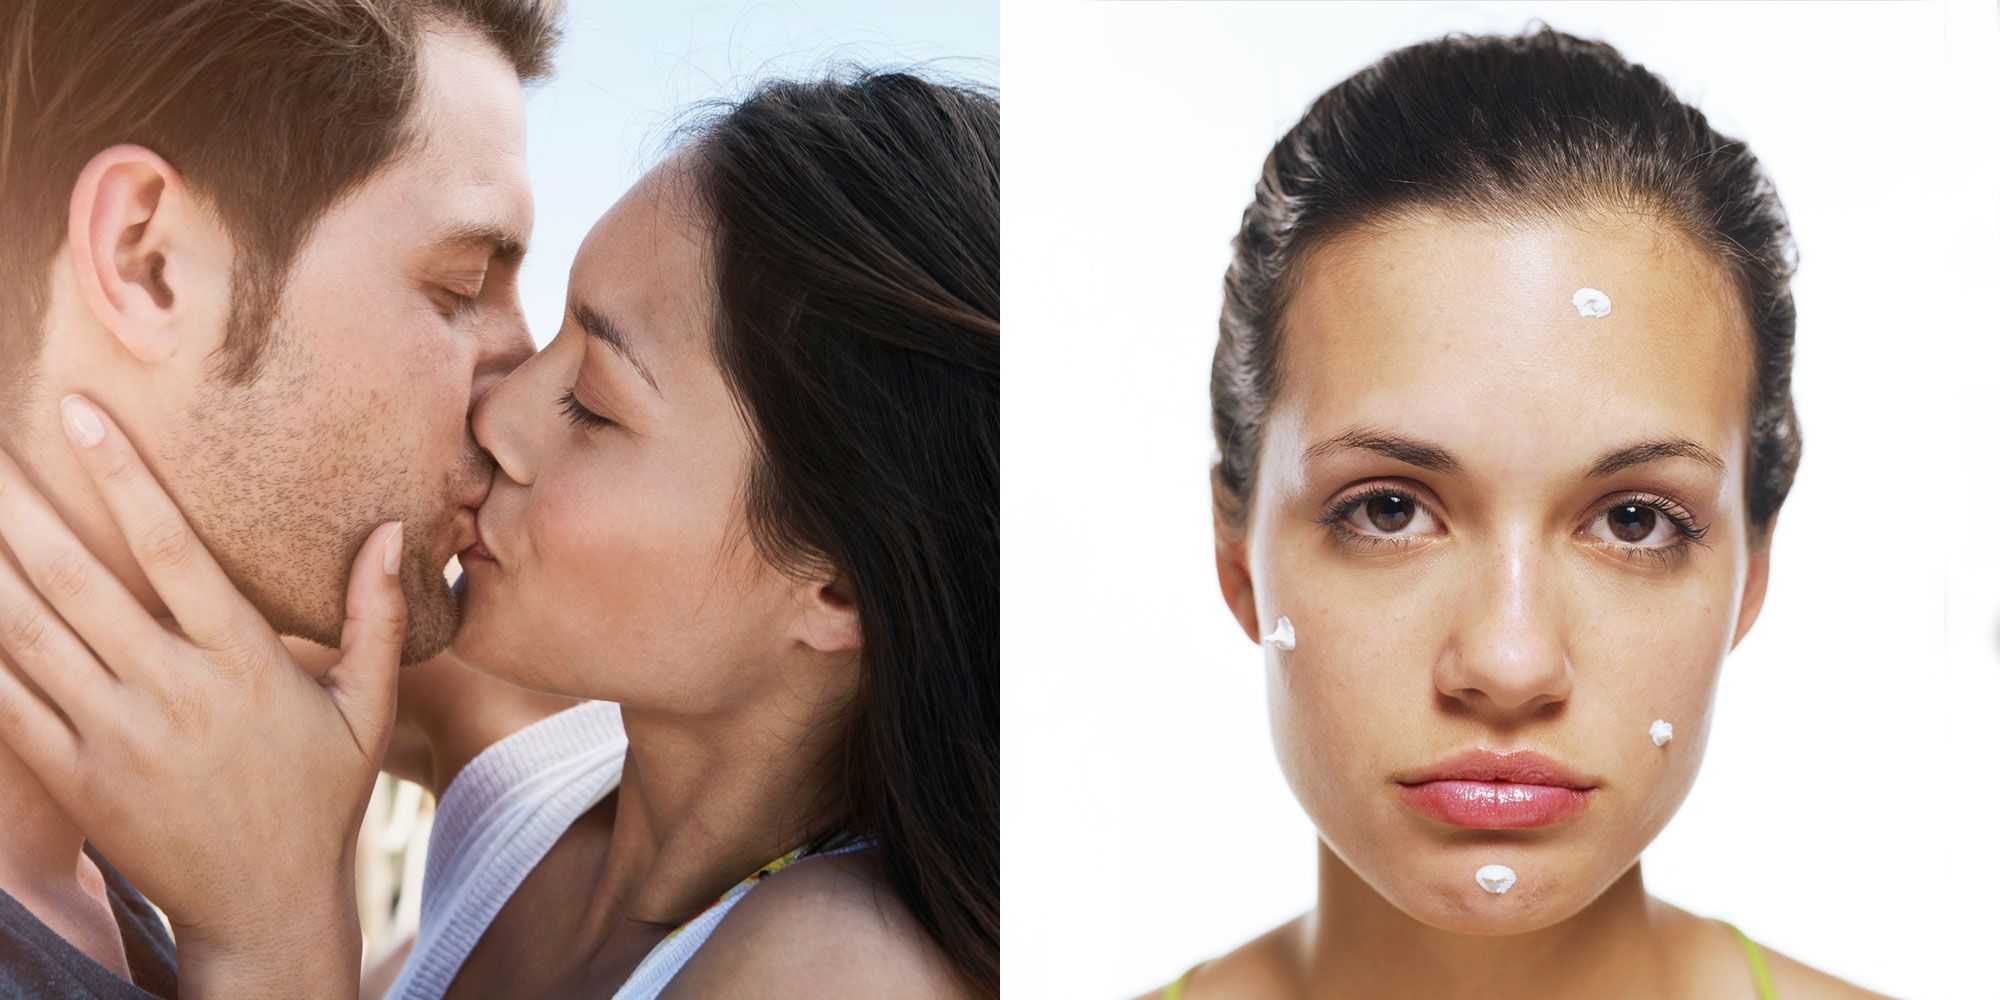 6 Ways Sex Causes Acne and What to Do About It